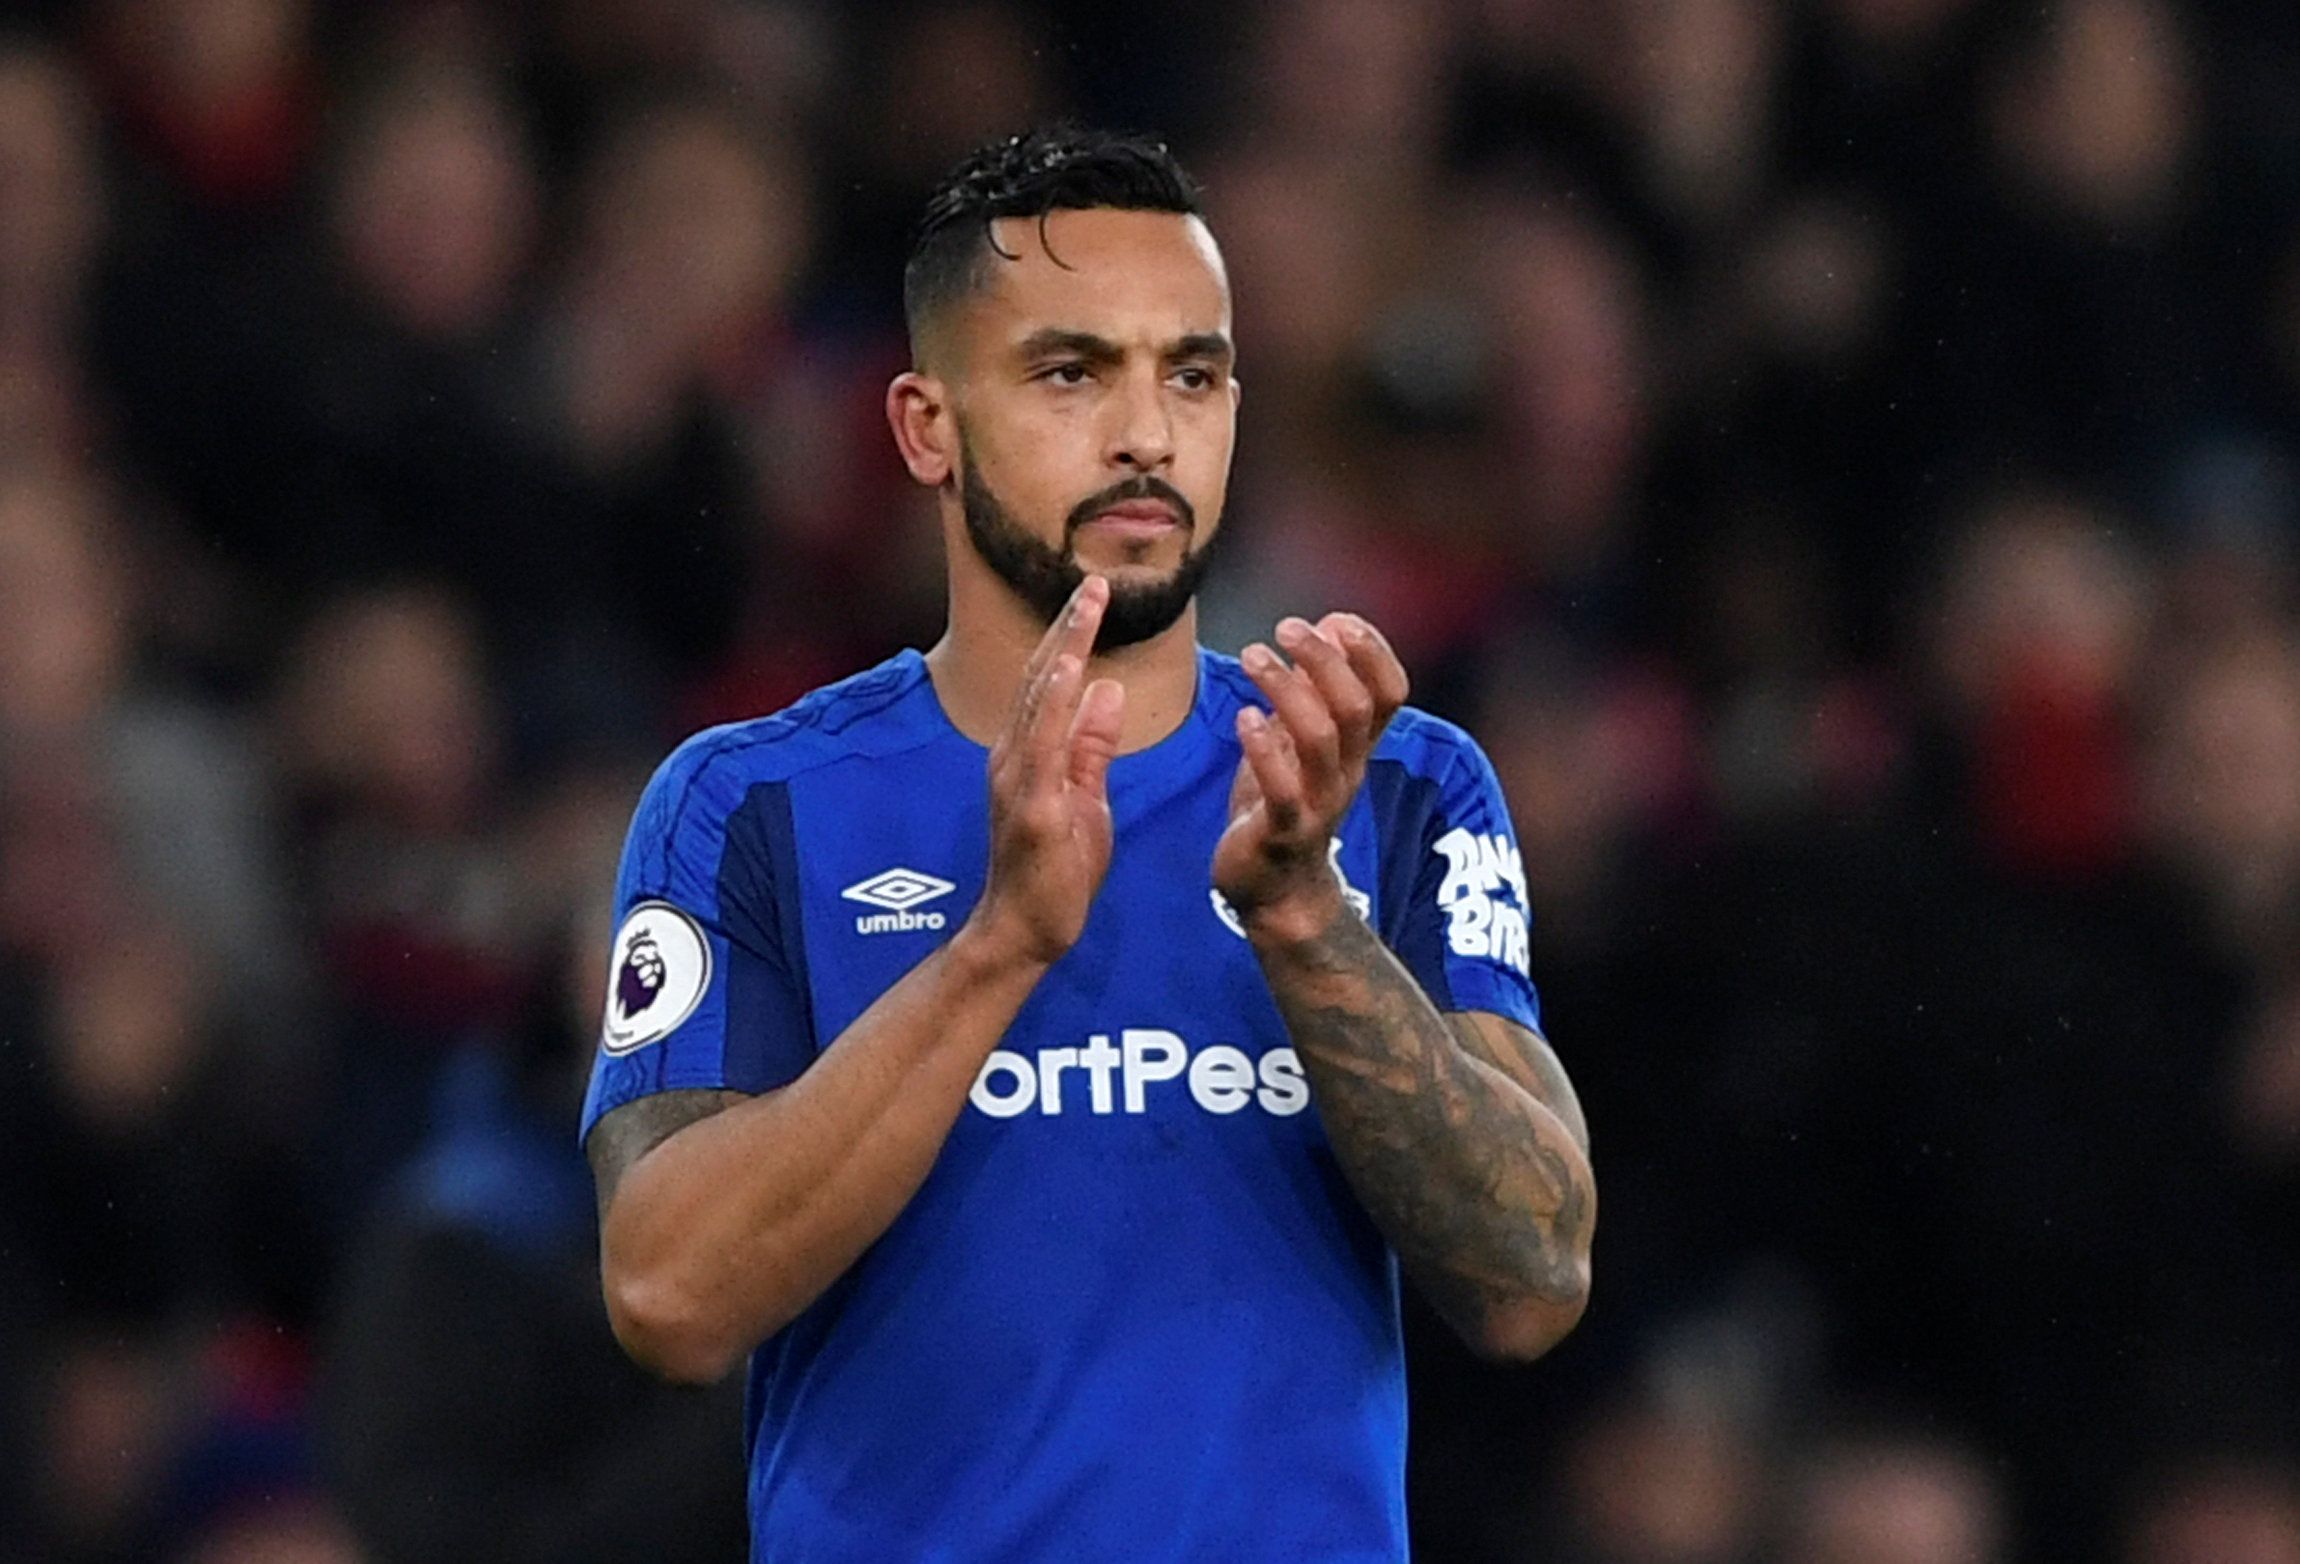 Soccer Football - Premier League - Arsenal vs Everton - Emirates Stadium, London, Britain - February 3, 2018   Everton's Theo Walcott applauds the fans as he is substituted   Action Images via Reuters/Tony O'Brien    EDITORIAL USE ONLY. No use with unauthorized audio, video, data, fixture lists, club/league logos or 